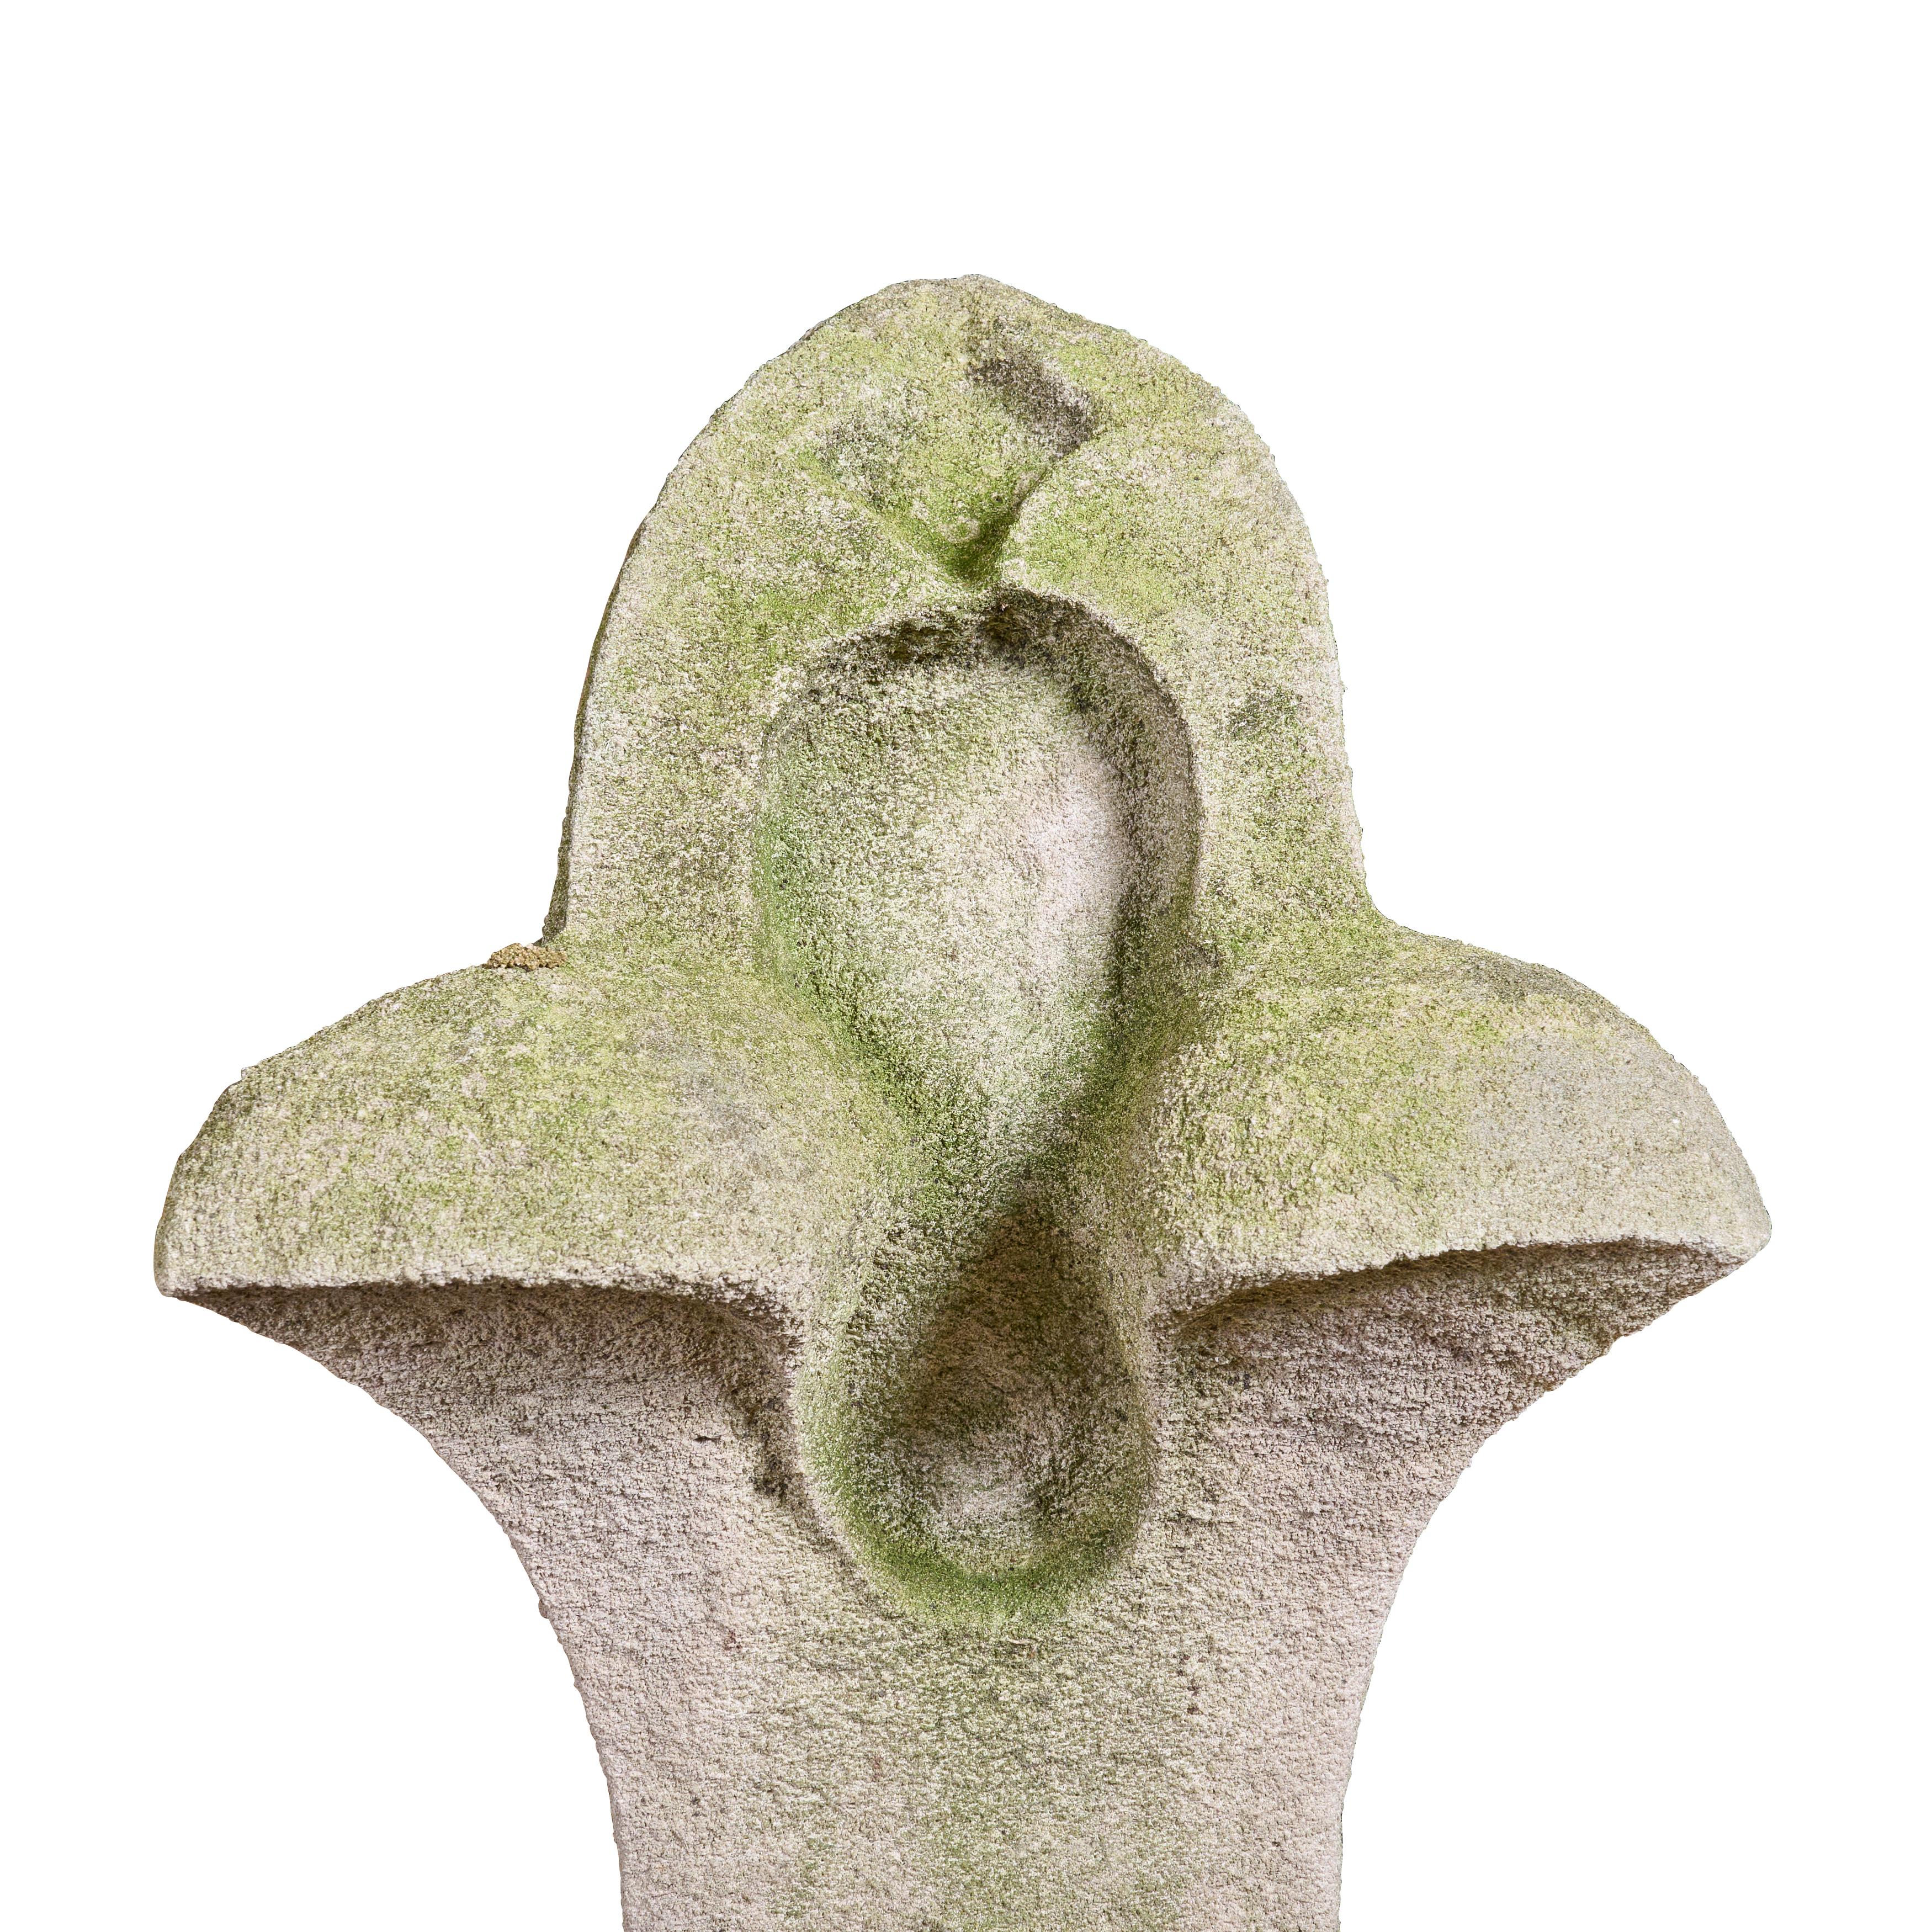 Carved limestone rooftop finial. Great patina.

